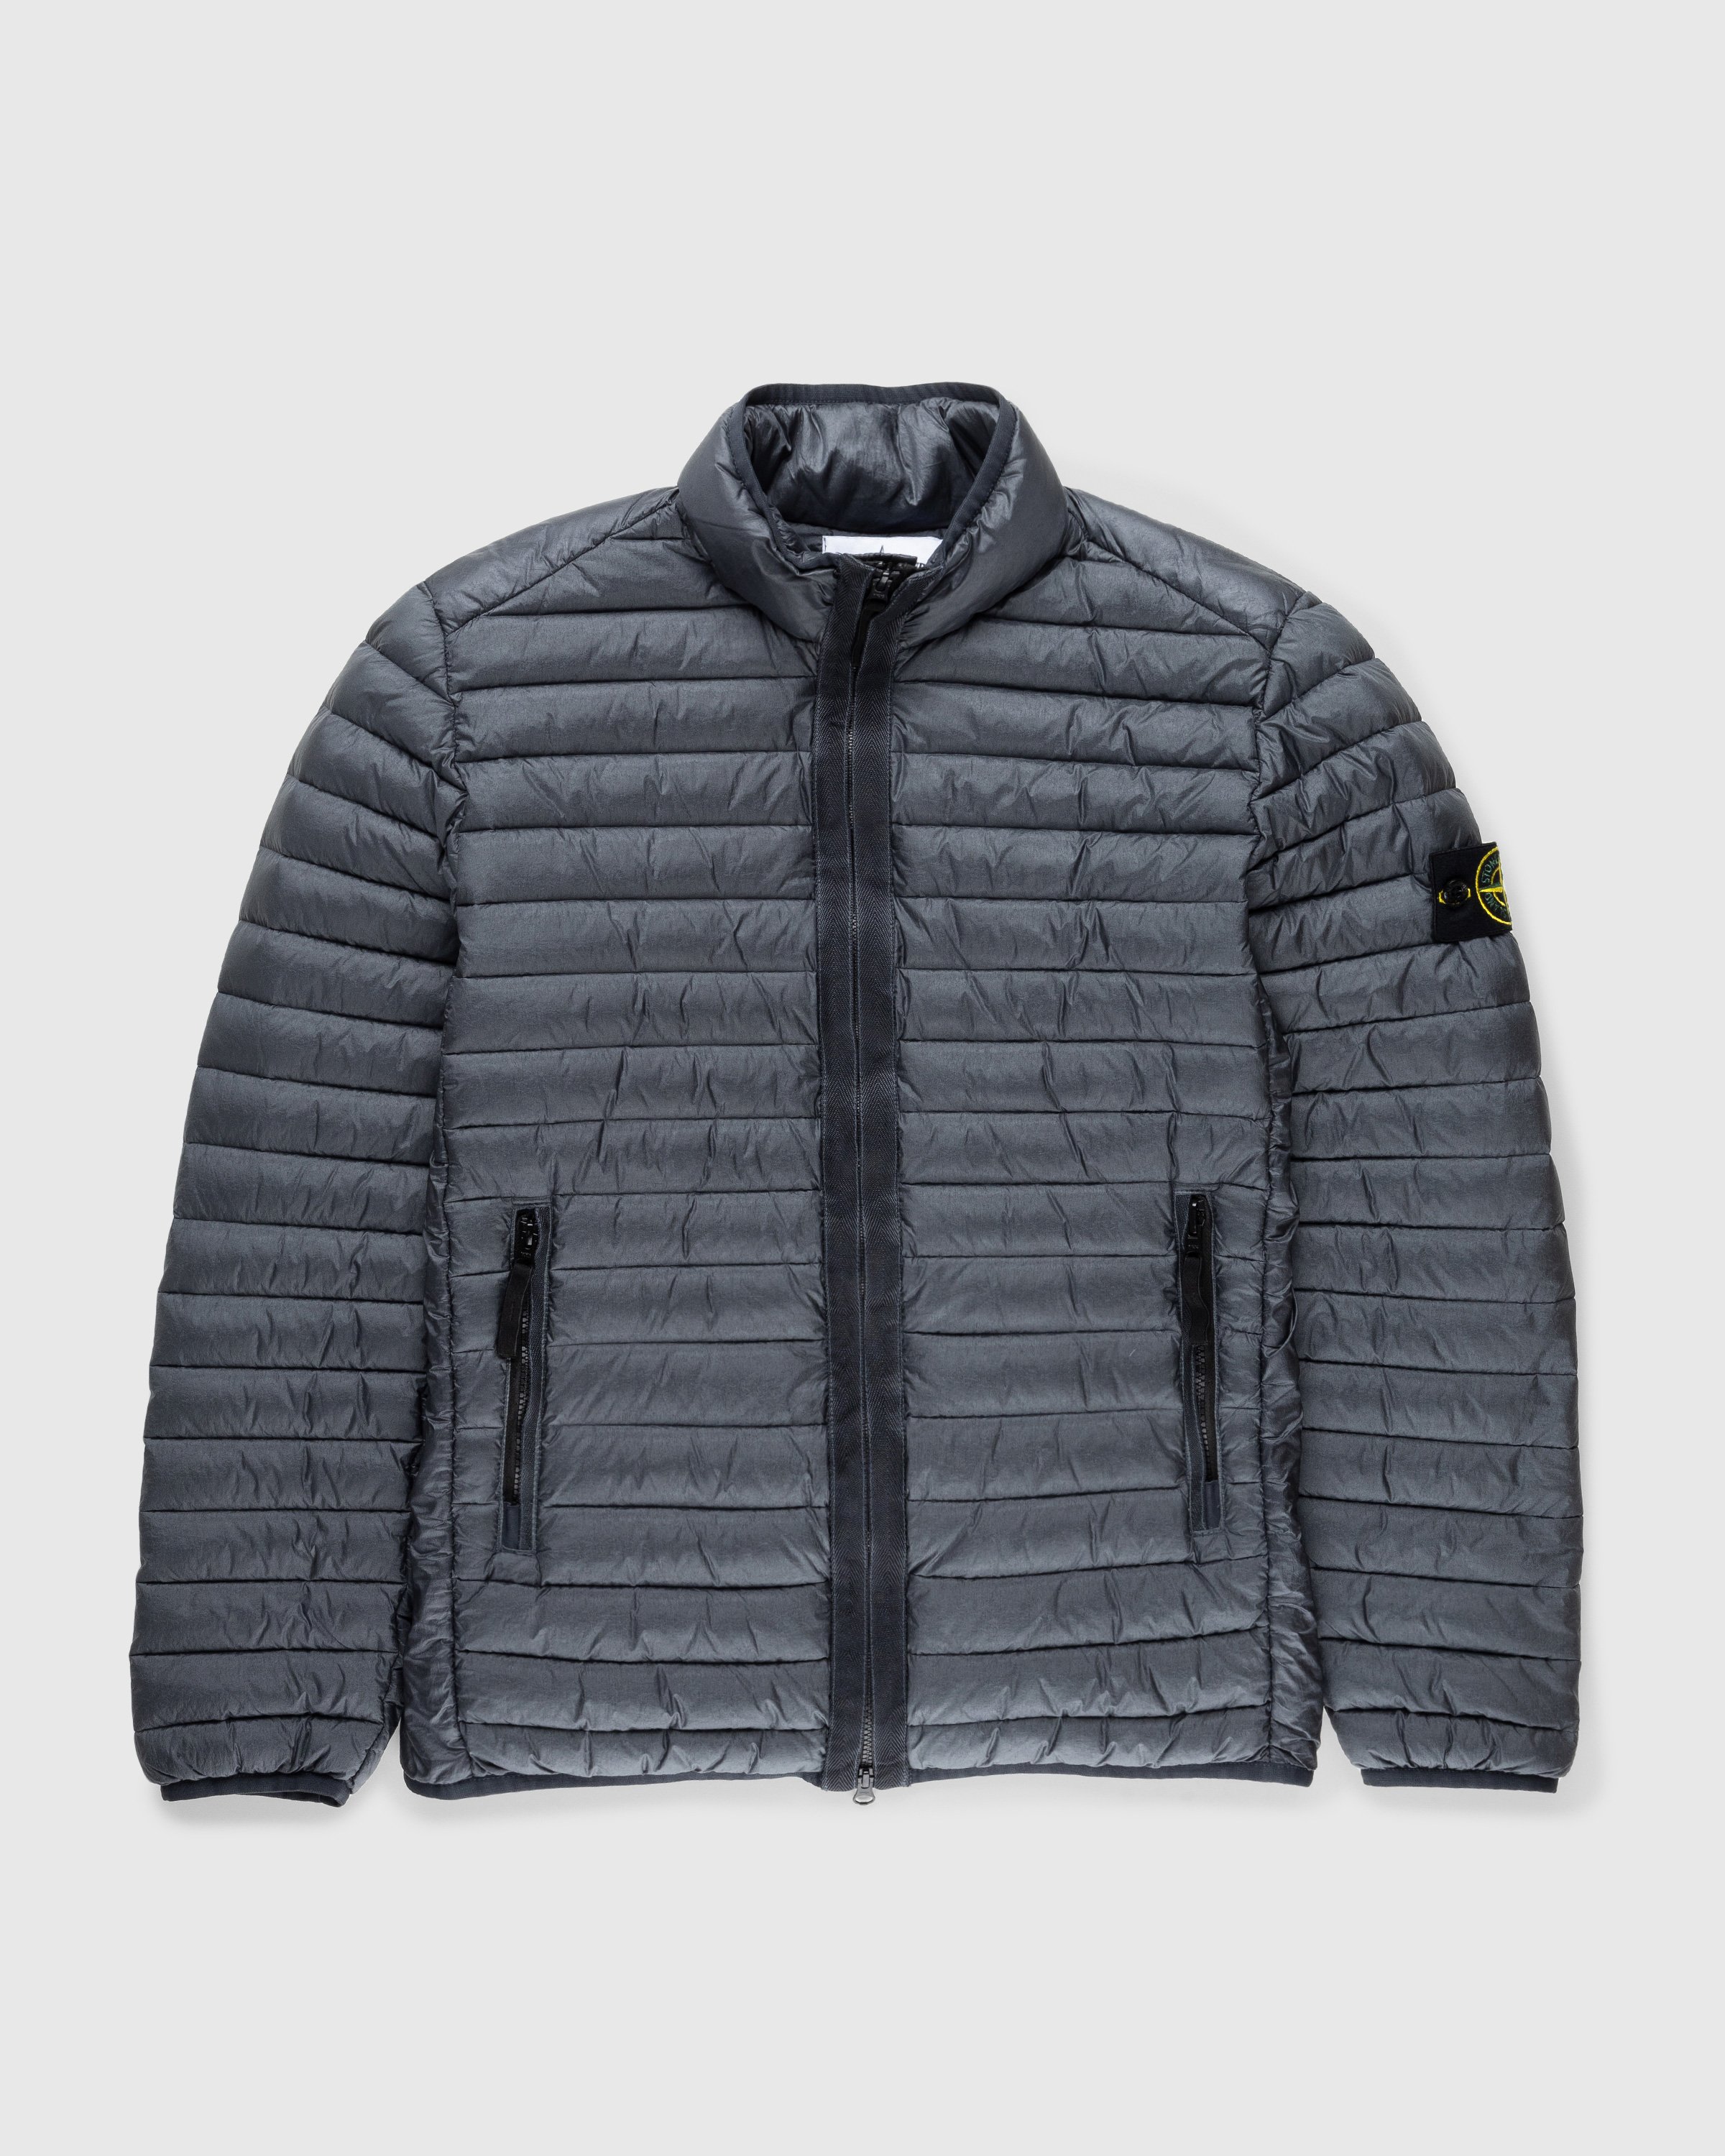 Stone Island - Packable Recycled Nylon Down Jacket Lead Grey - Clothing - Grey - Image 1